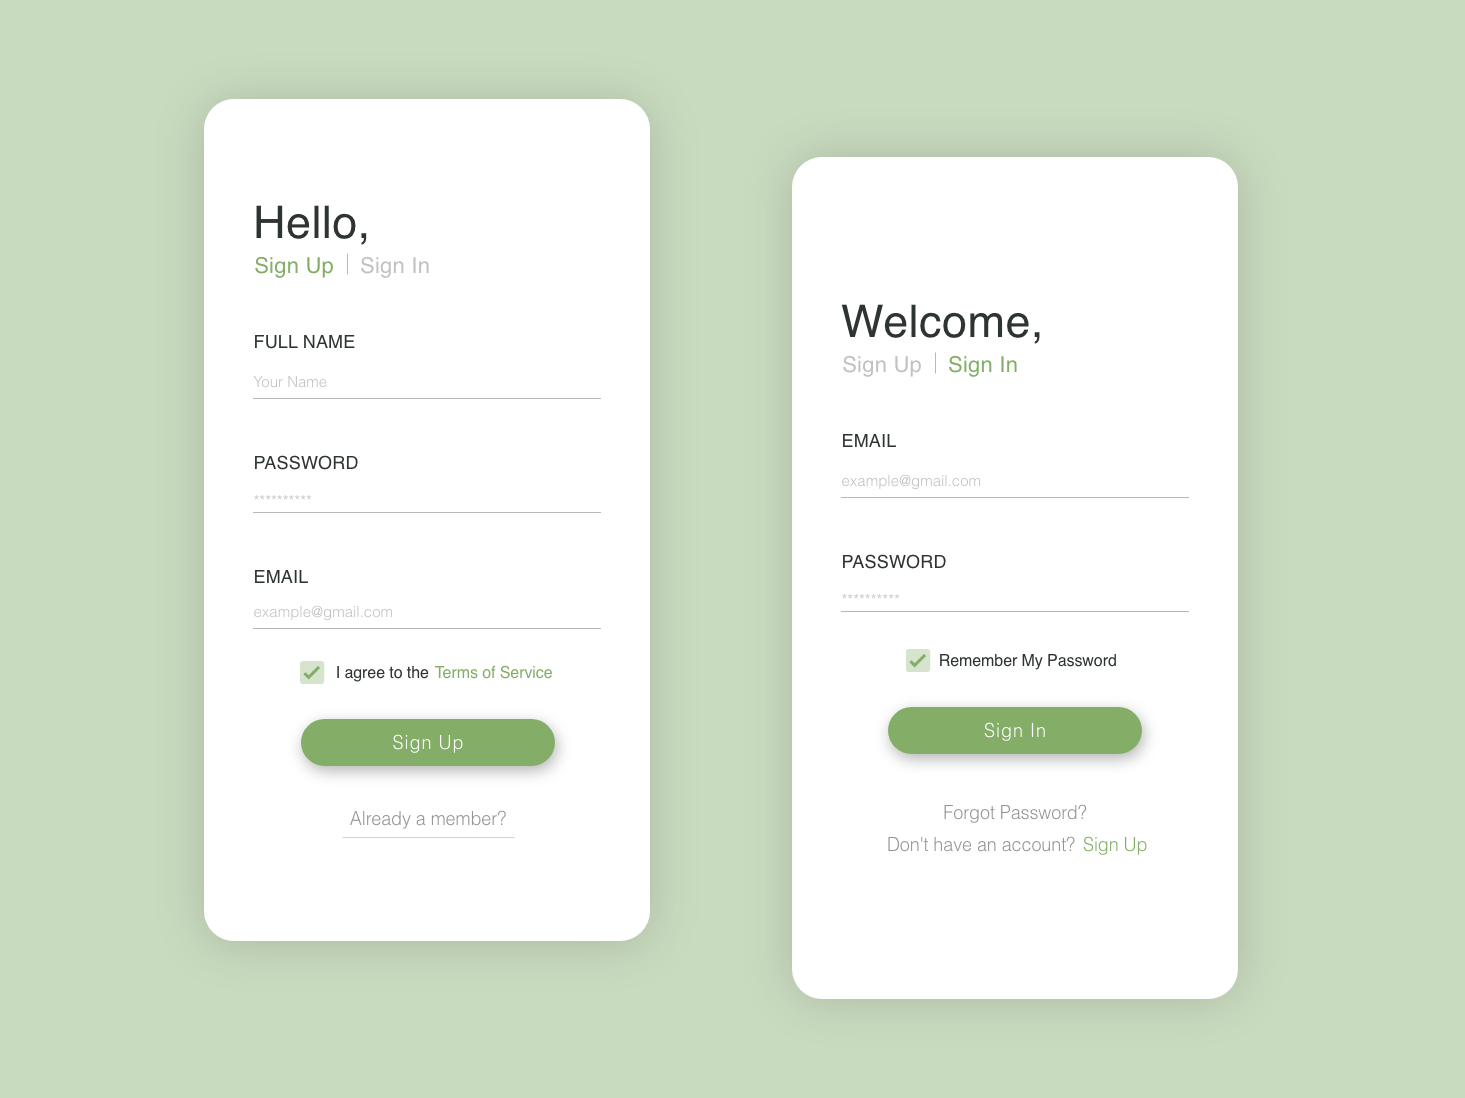 Sign Up / Sign In UI by John Gavin on Dribbble